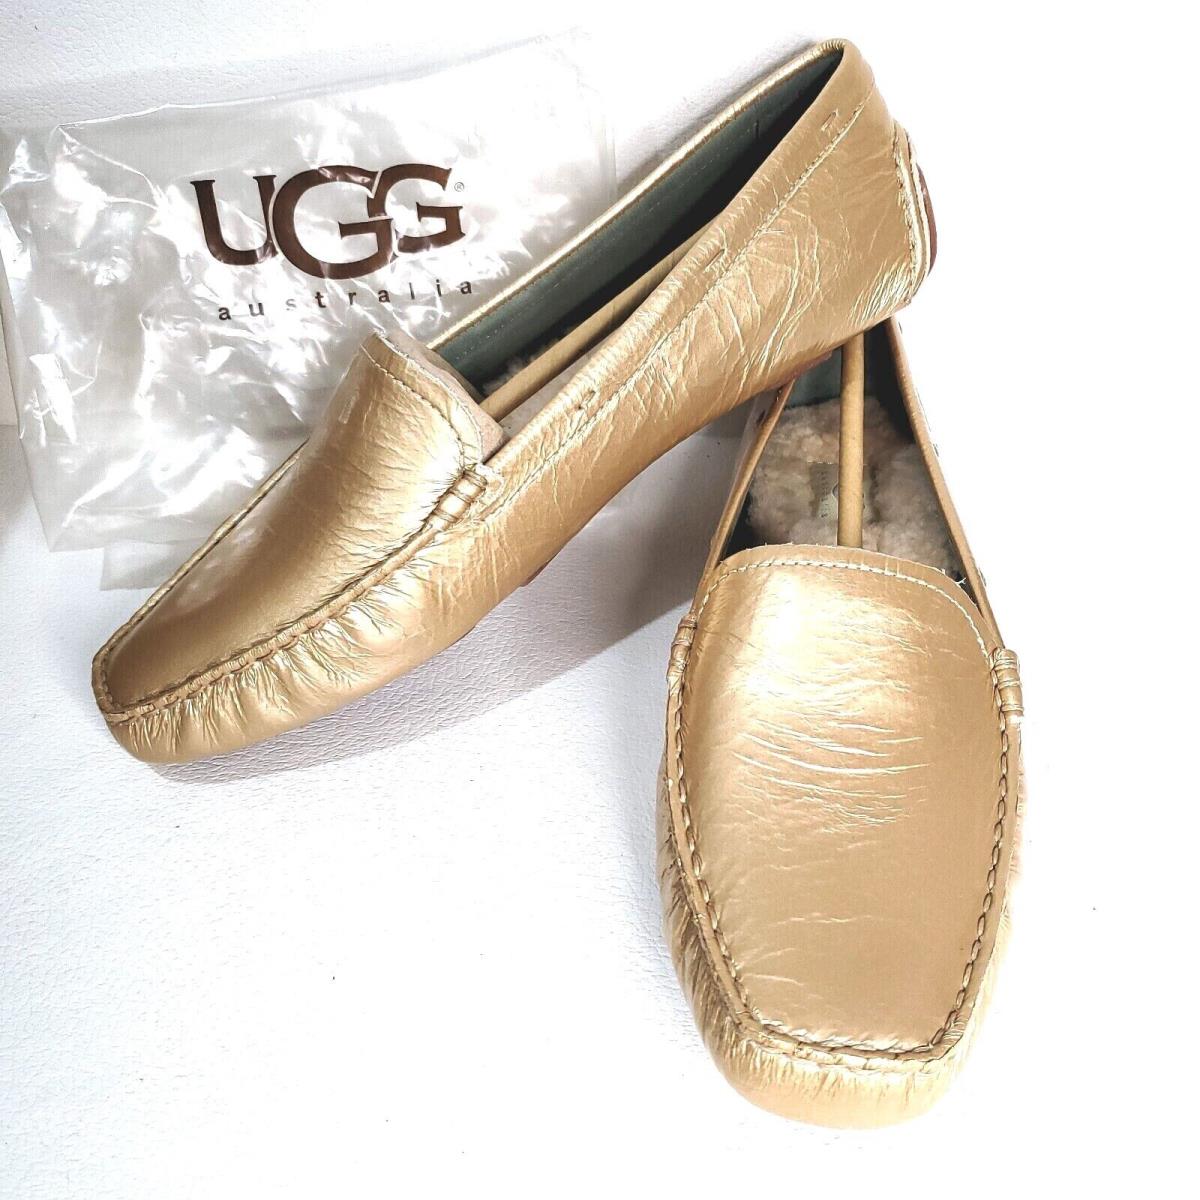 Ugg Australia Sightsee Driving Mocs 9 Classic Gold Crinkle Patent Loafers